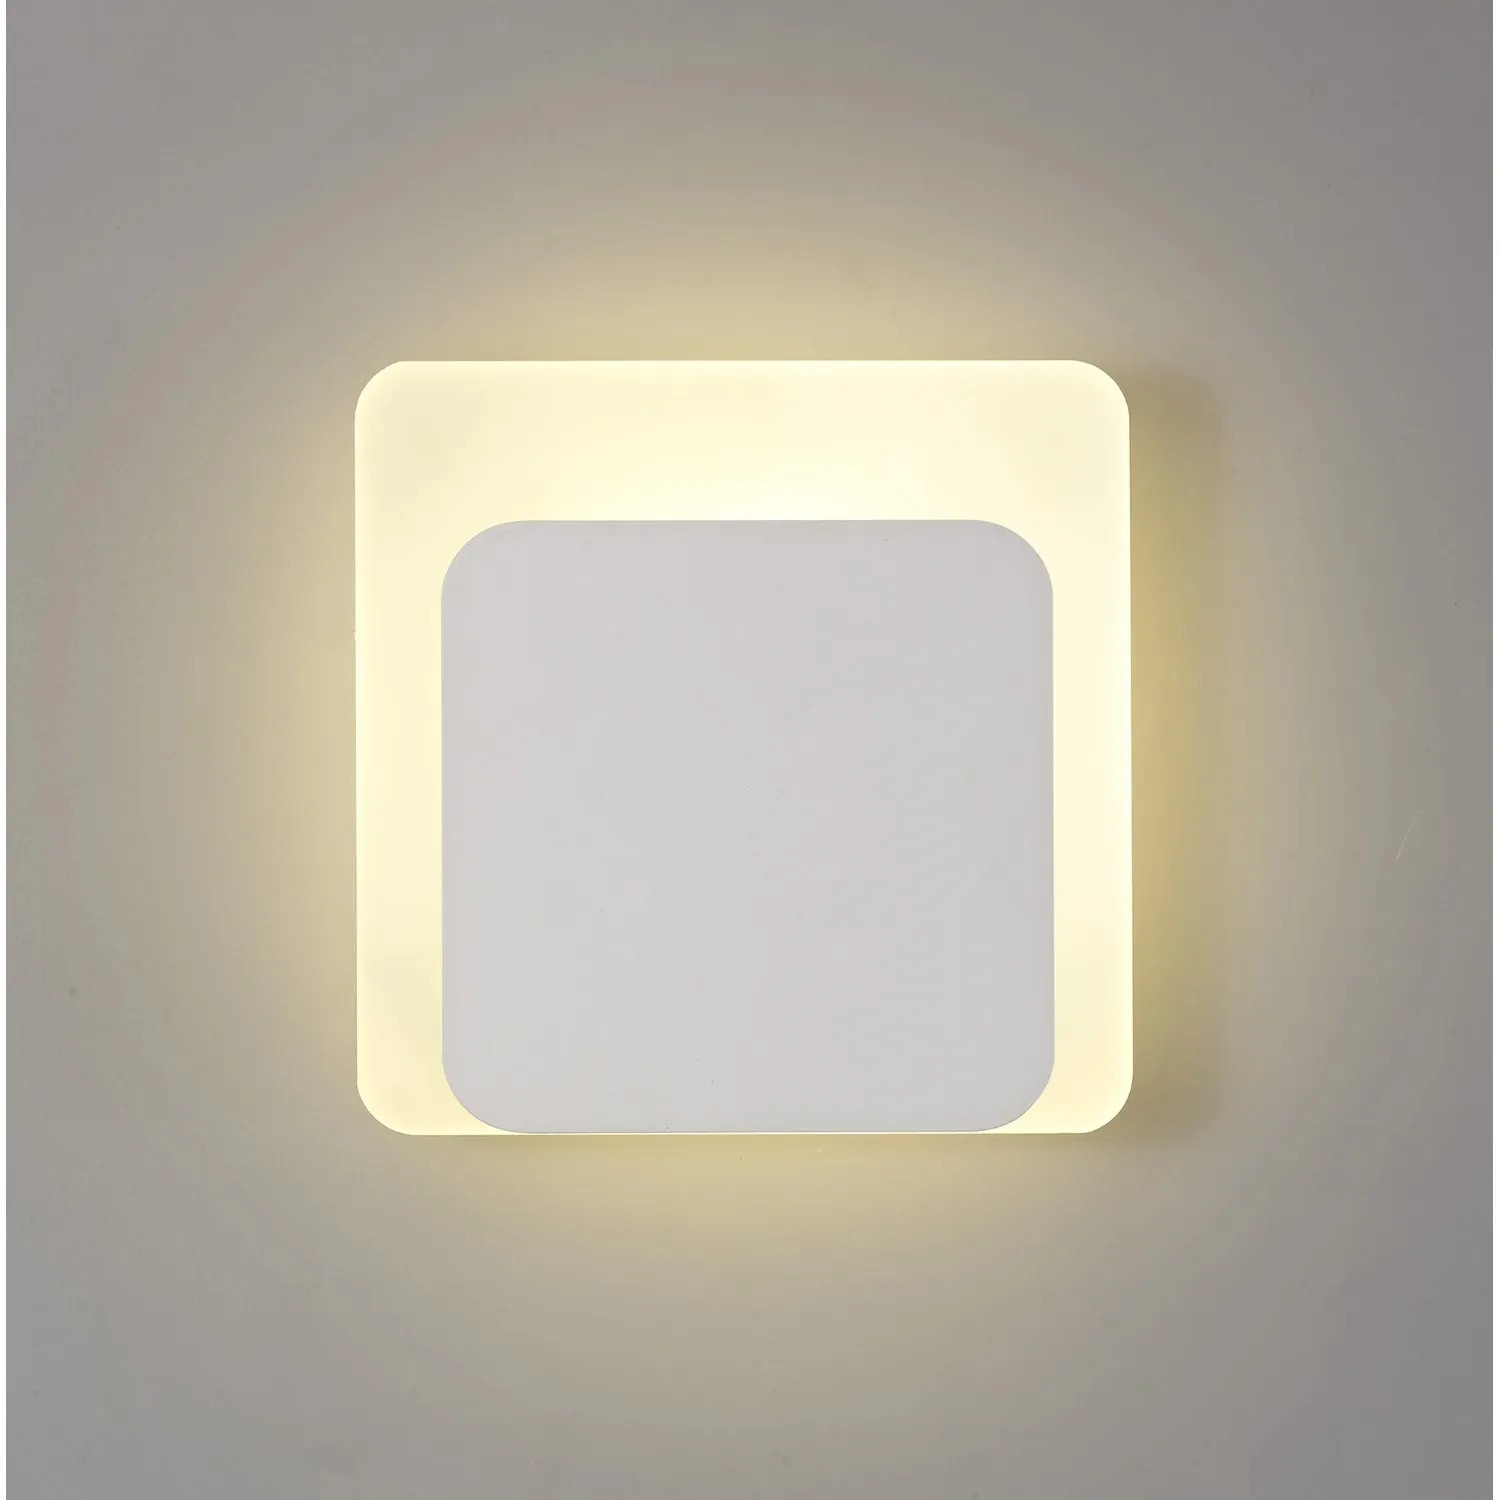 Edgware Magnetic Base Wall Lamp, 12W LED 3000K 498lm, 15 19cm Square Bottom Offset, Sand White Acrylic Frosted Diffuser